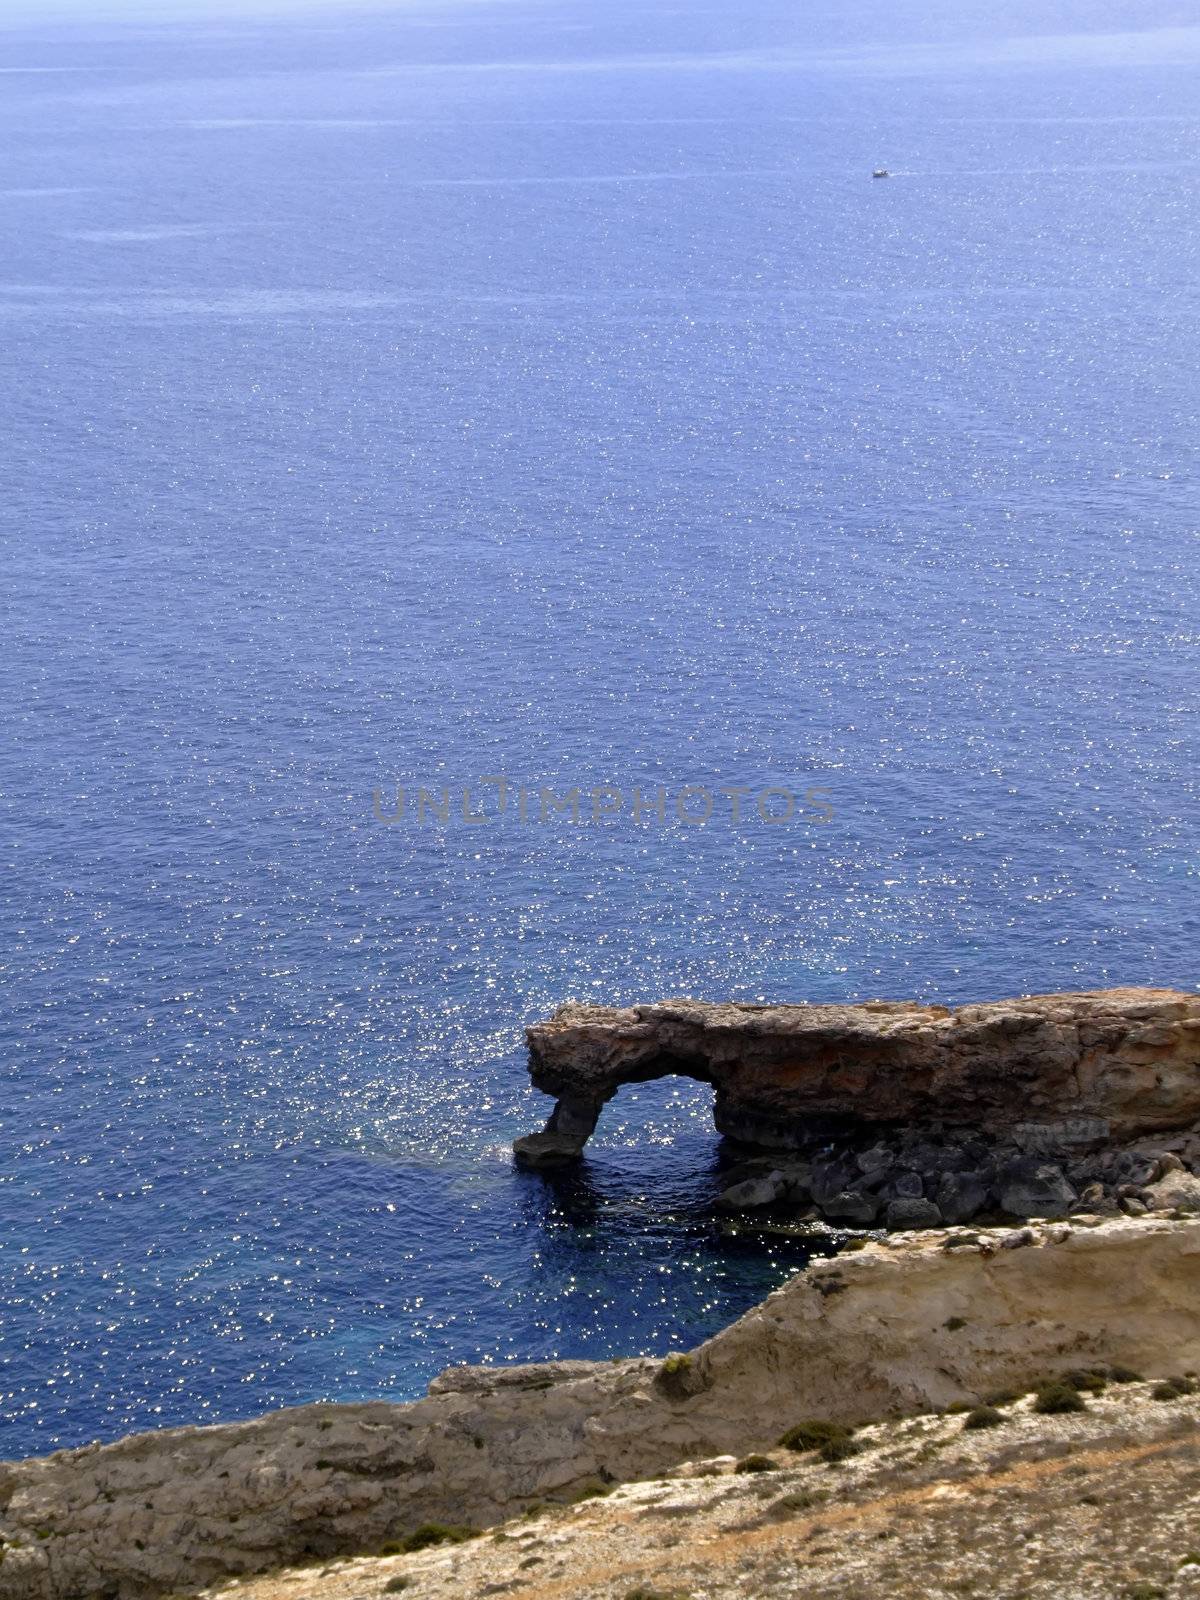 Typical ocean landscape and scenery from the coast in Malta.